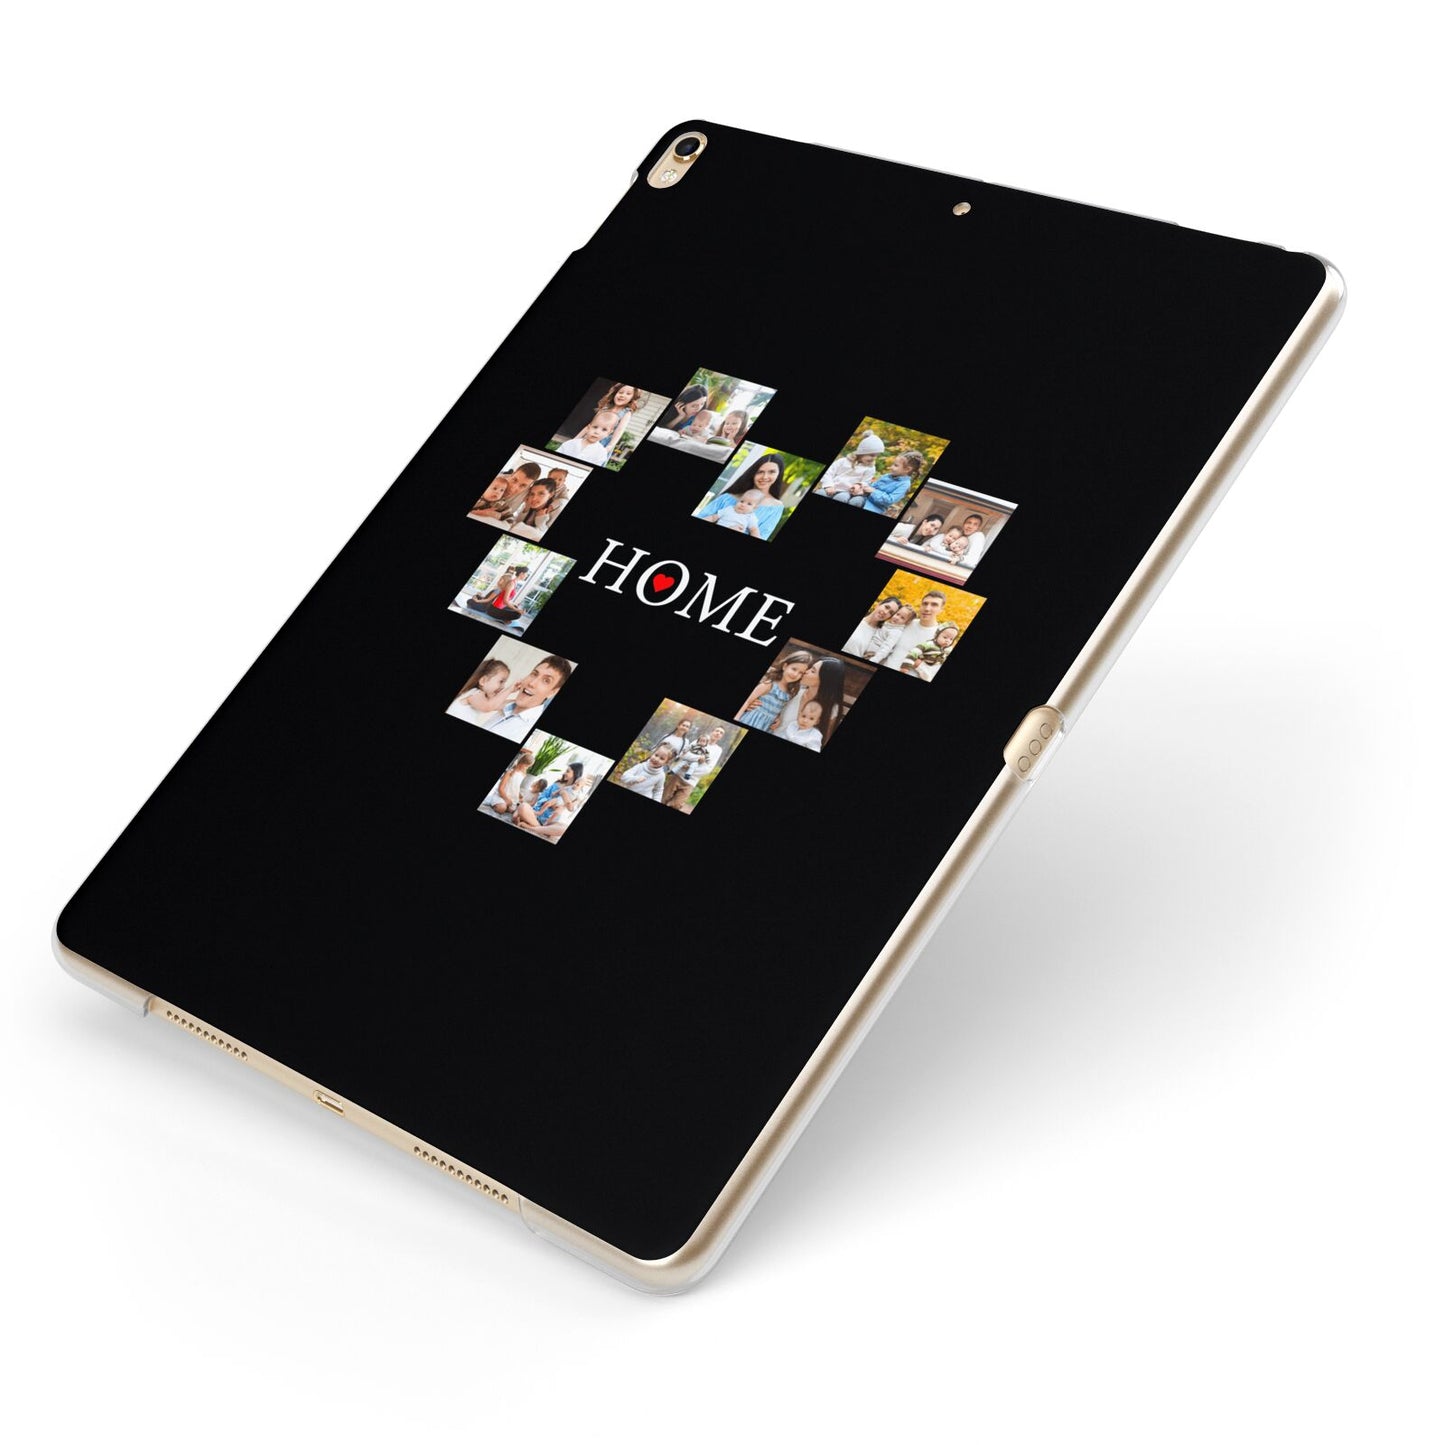 Photos of Home Personalised Apple iPad Case on Gold iPad Side View